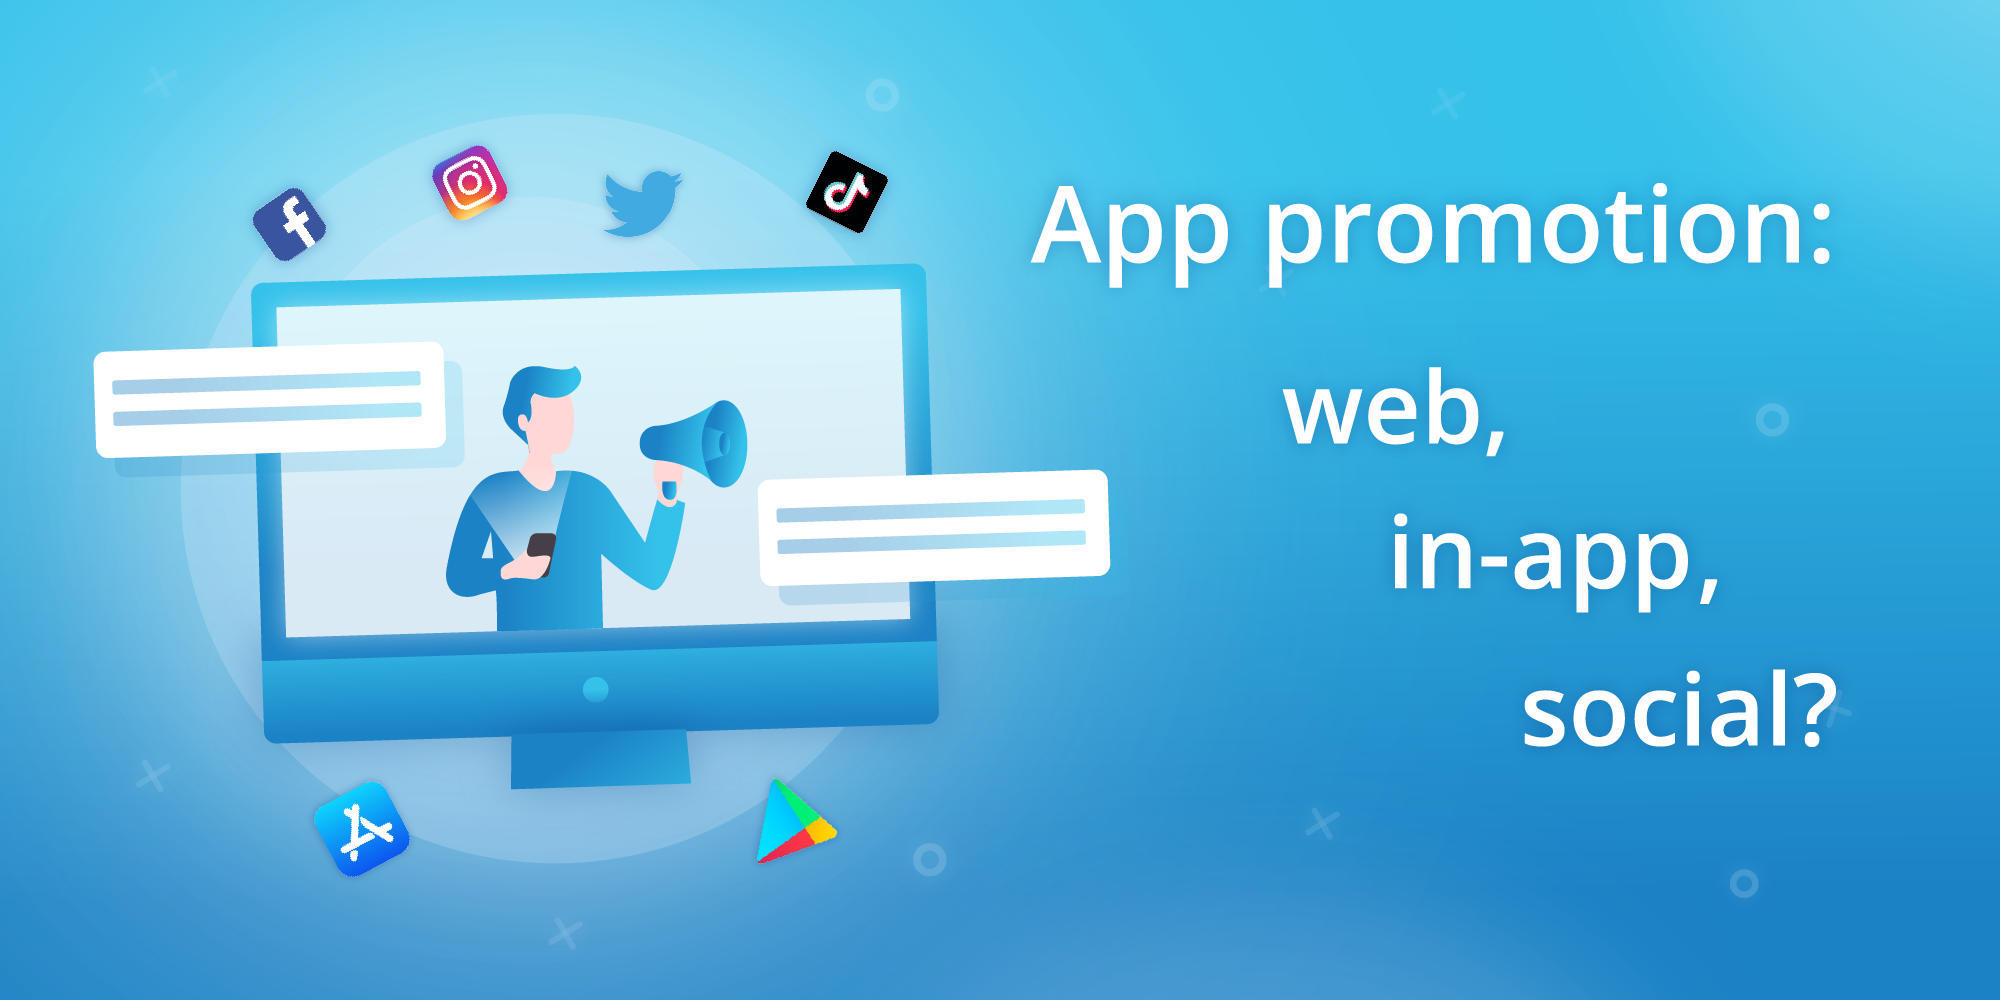 How to promote an app? Web, in-app, social - choosing the best way